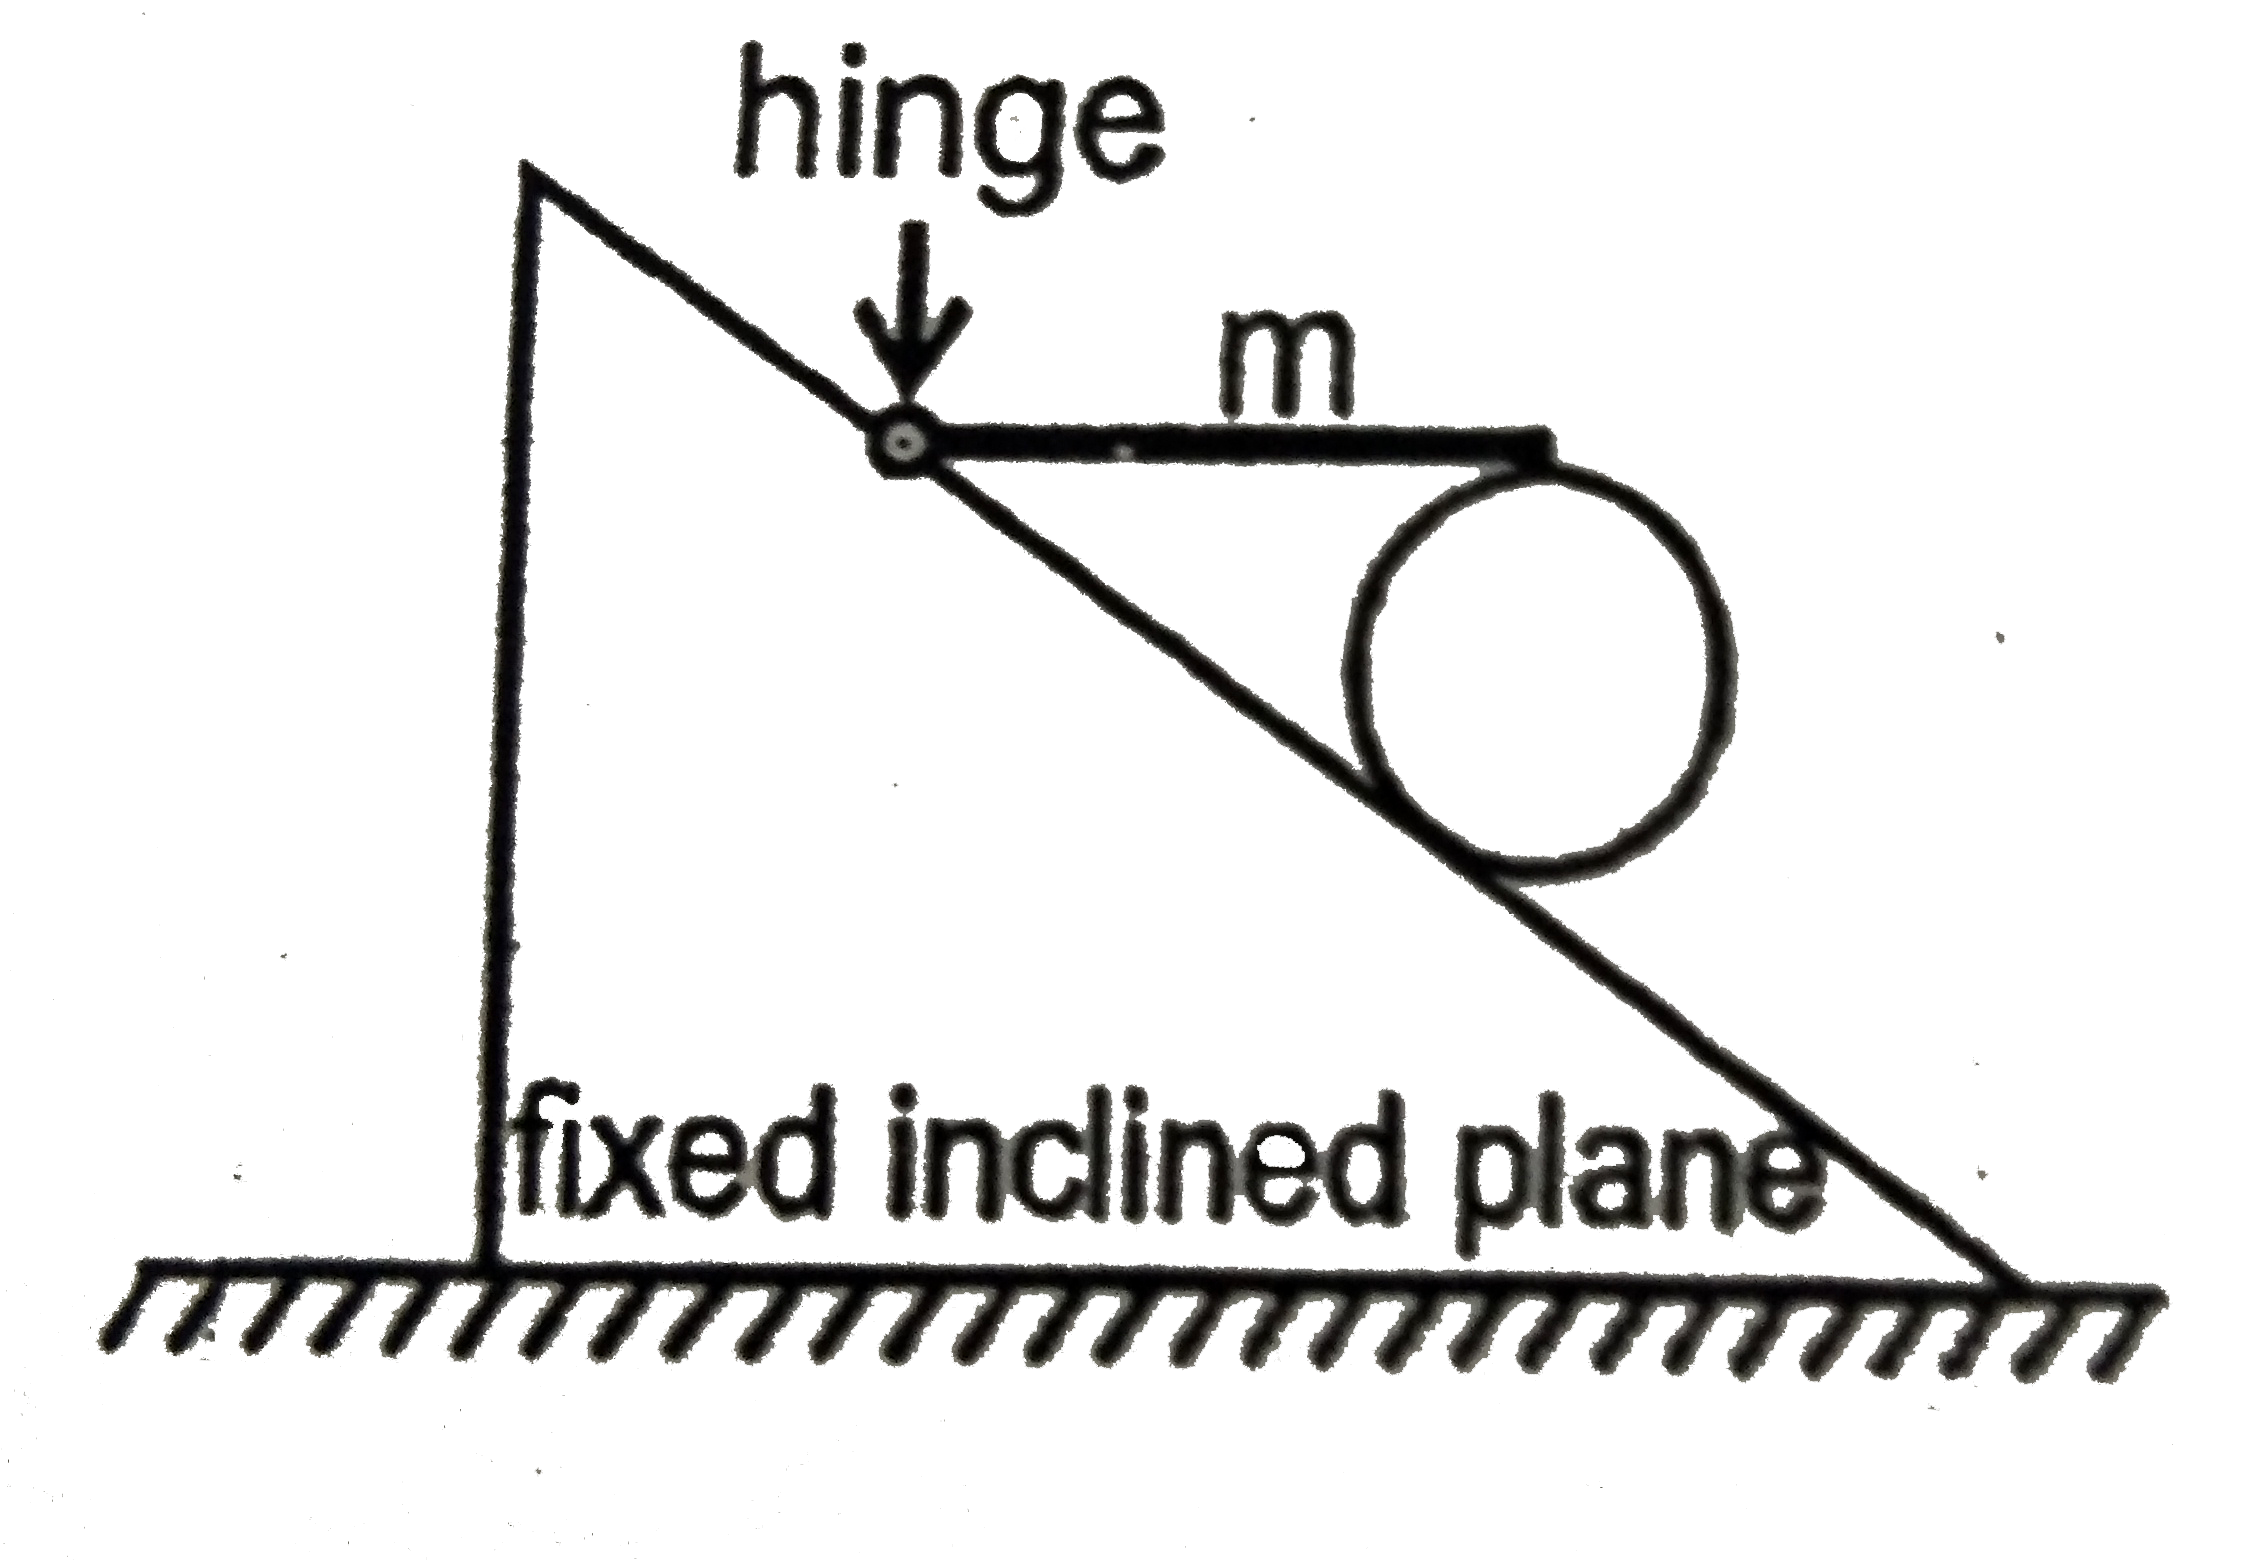 A horizontal uniform rod of mass 'm' has its left end hinged to the fixed incline plane, while its right end rrests on the top of a uniform cylinder of mass 'm' which in turn is at rest on the fixed inclined plane as shown. The coefficient of friction between the cylinder and rod, and between the cylinder and inclined plane, is sufficient to keep the cylinder at rest.      The magnitude of normal reaction exerted by the rod  on the cylinder is